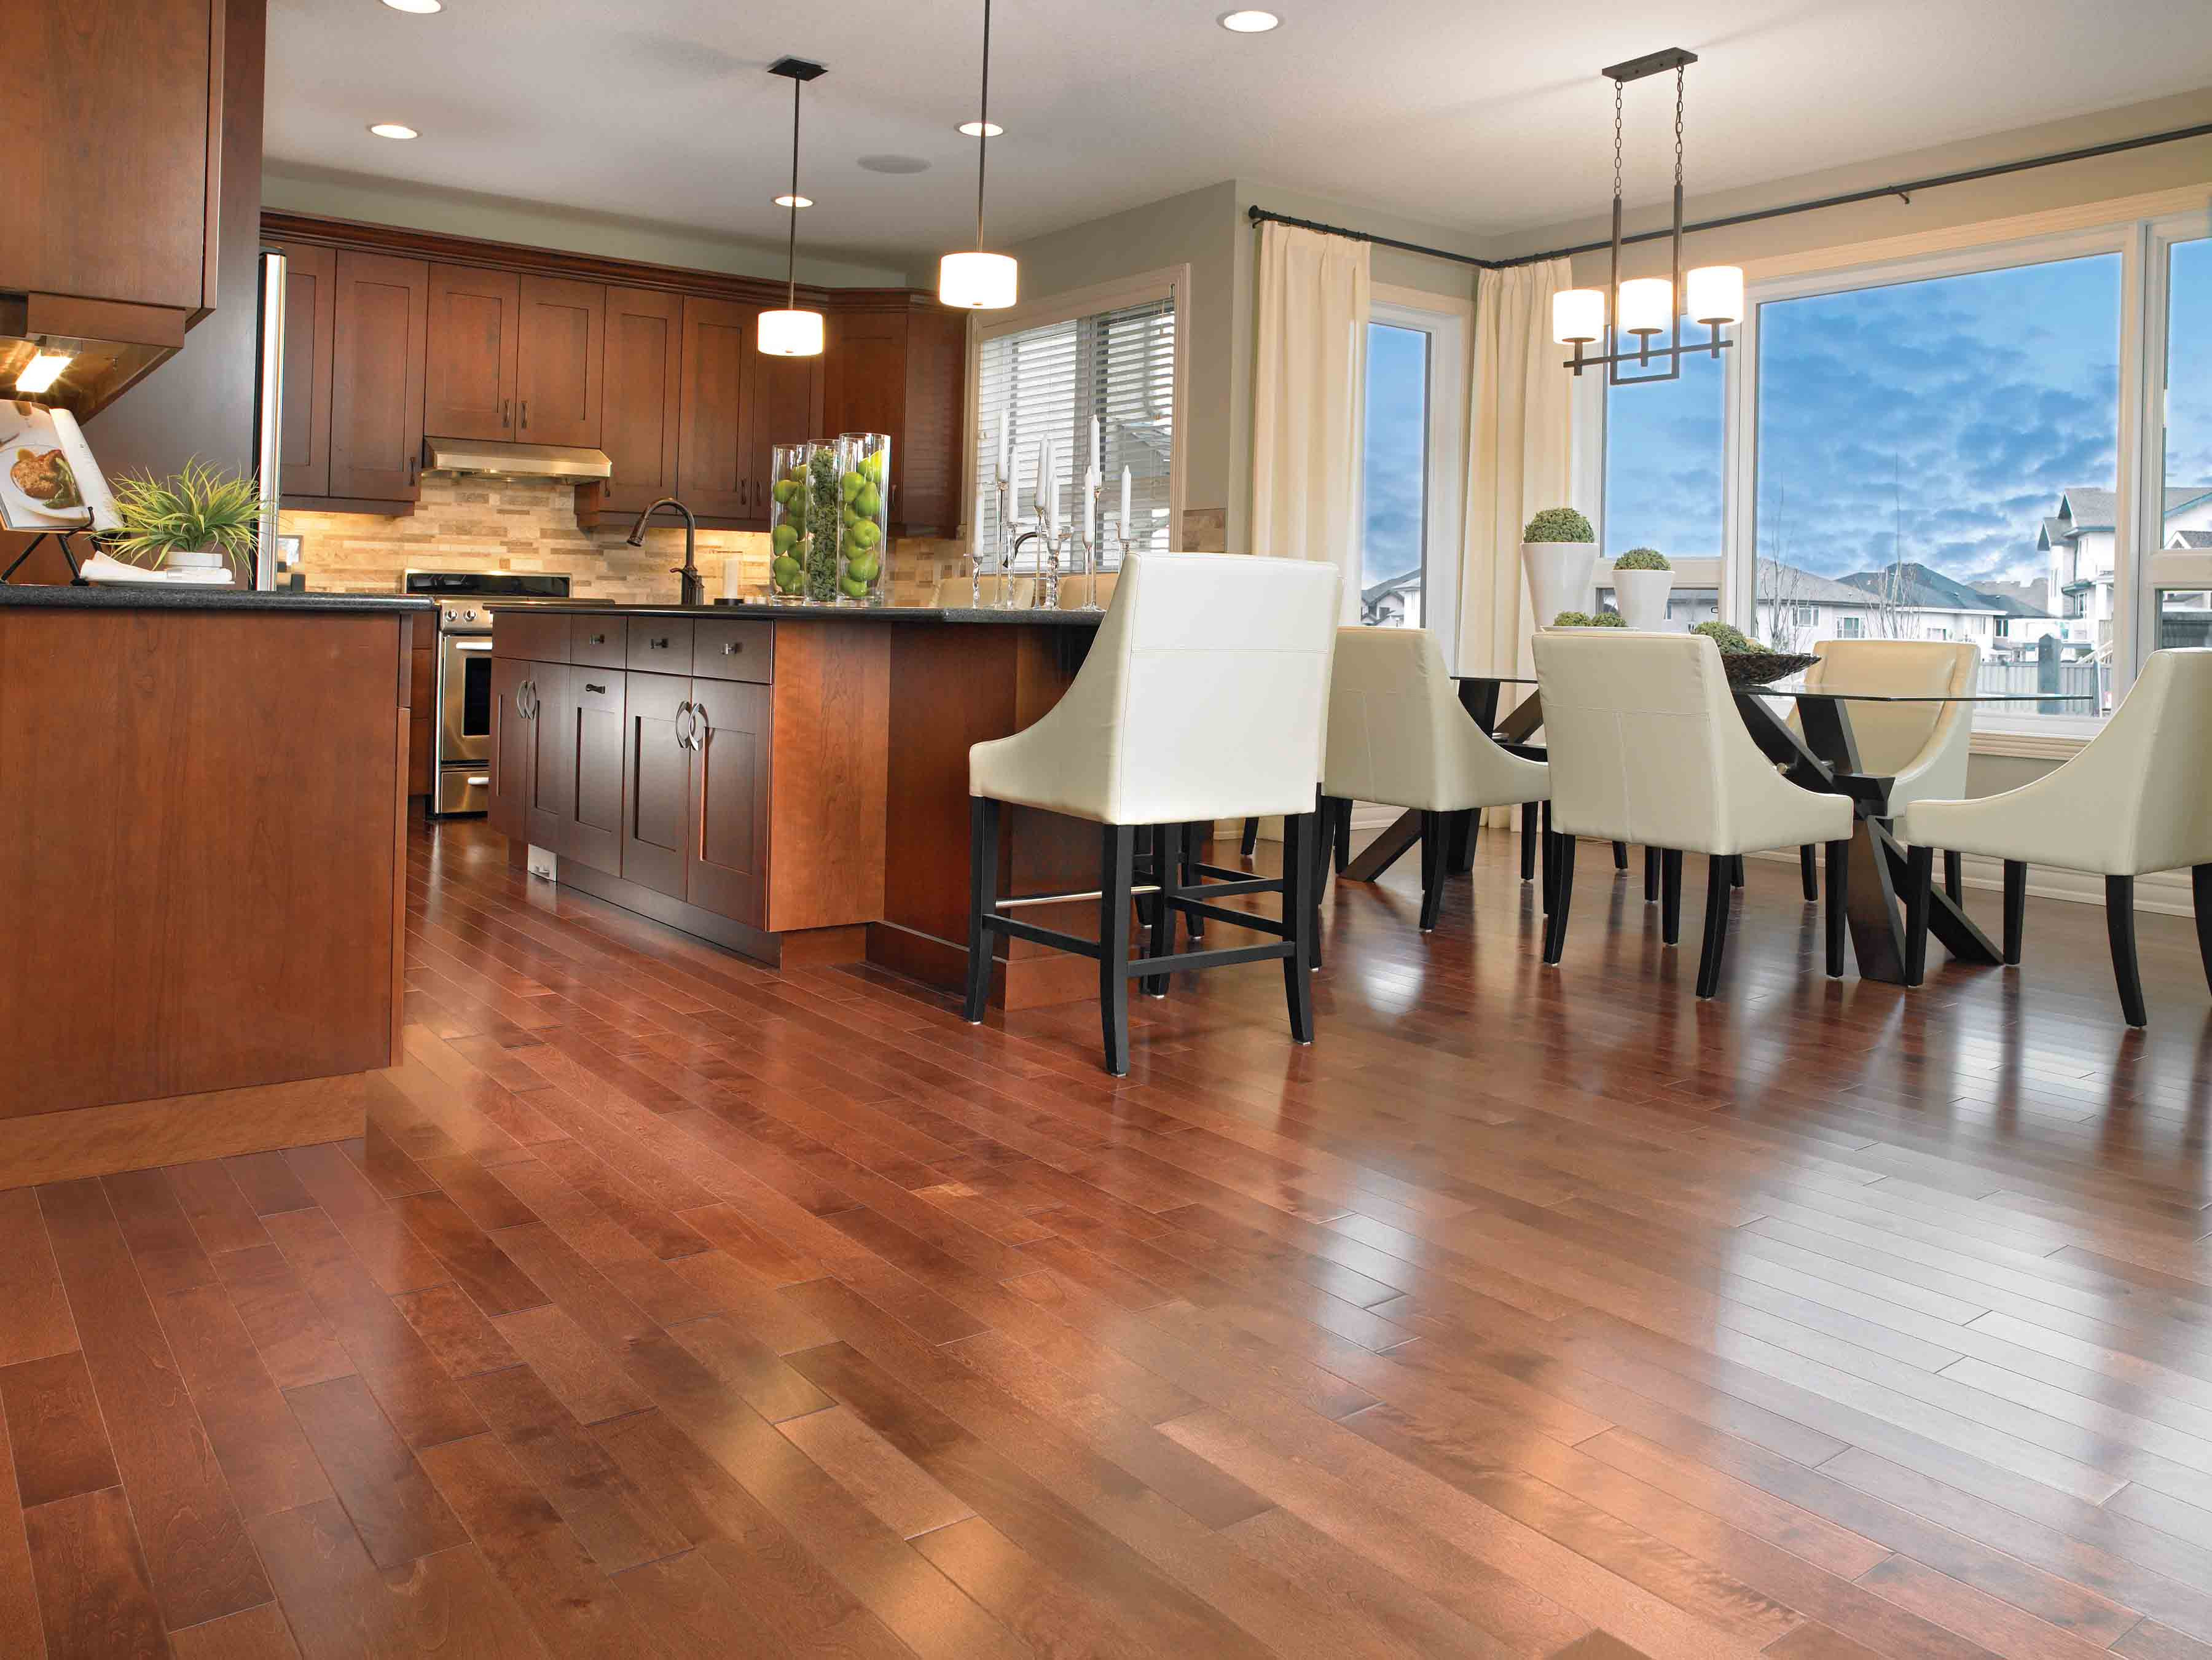 Home Depot Canada Engineered Hardwood Flooring Of Breathtaking Wood Flooring Pictures Beautiful Floors are Here Only Pertaining to Breathtaking Wood Flooring Picture Hardwood In Kitchen Pro and Con Express Mirage Yellow Birch Montana Cost